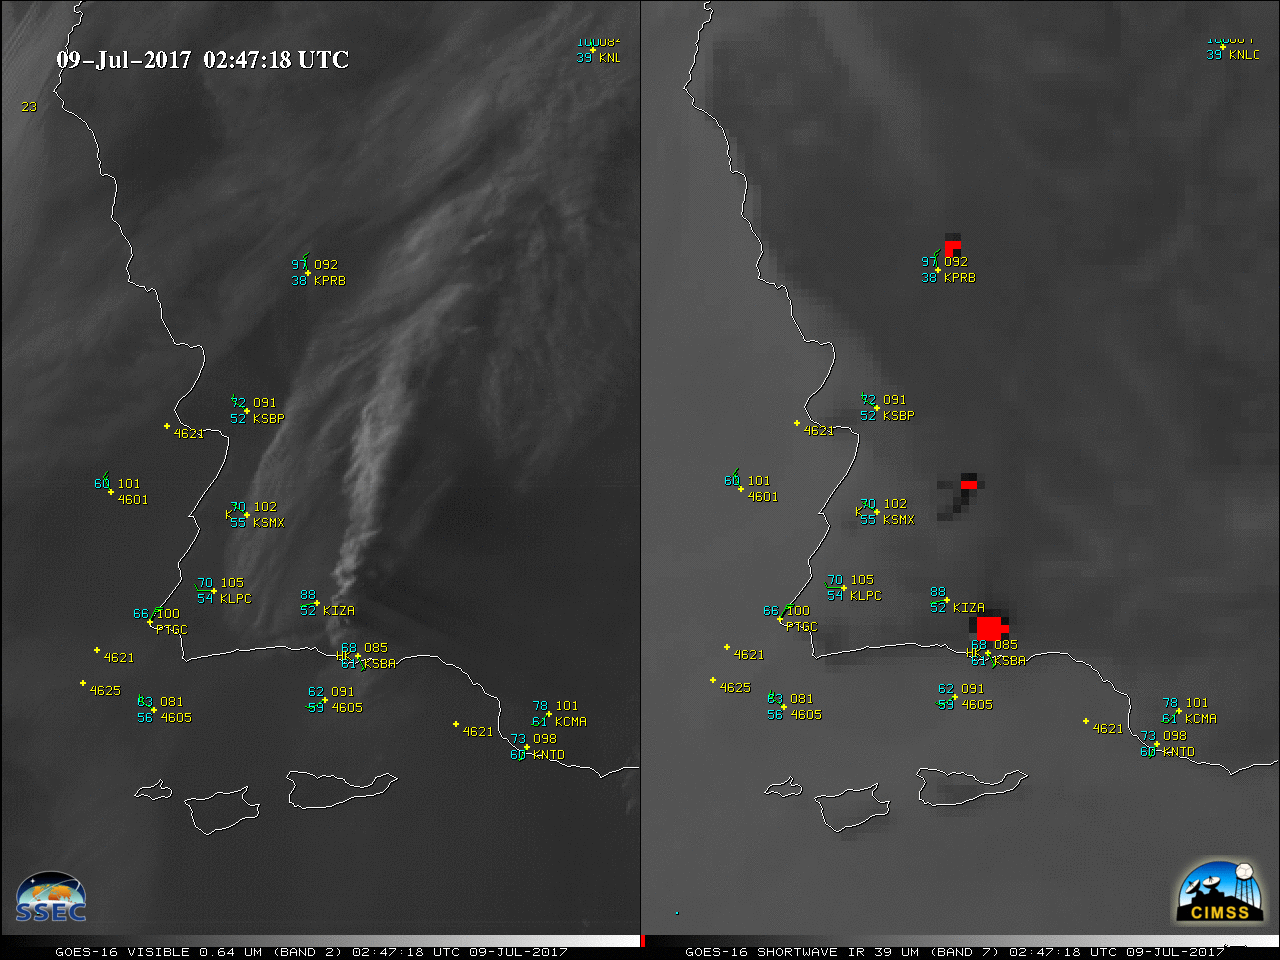 GOES-16 Visible (0.64 µm) and Shortwave Infrared (3.9 µm) images, with hourly surface plots [click to play MP4 animation]